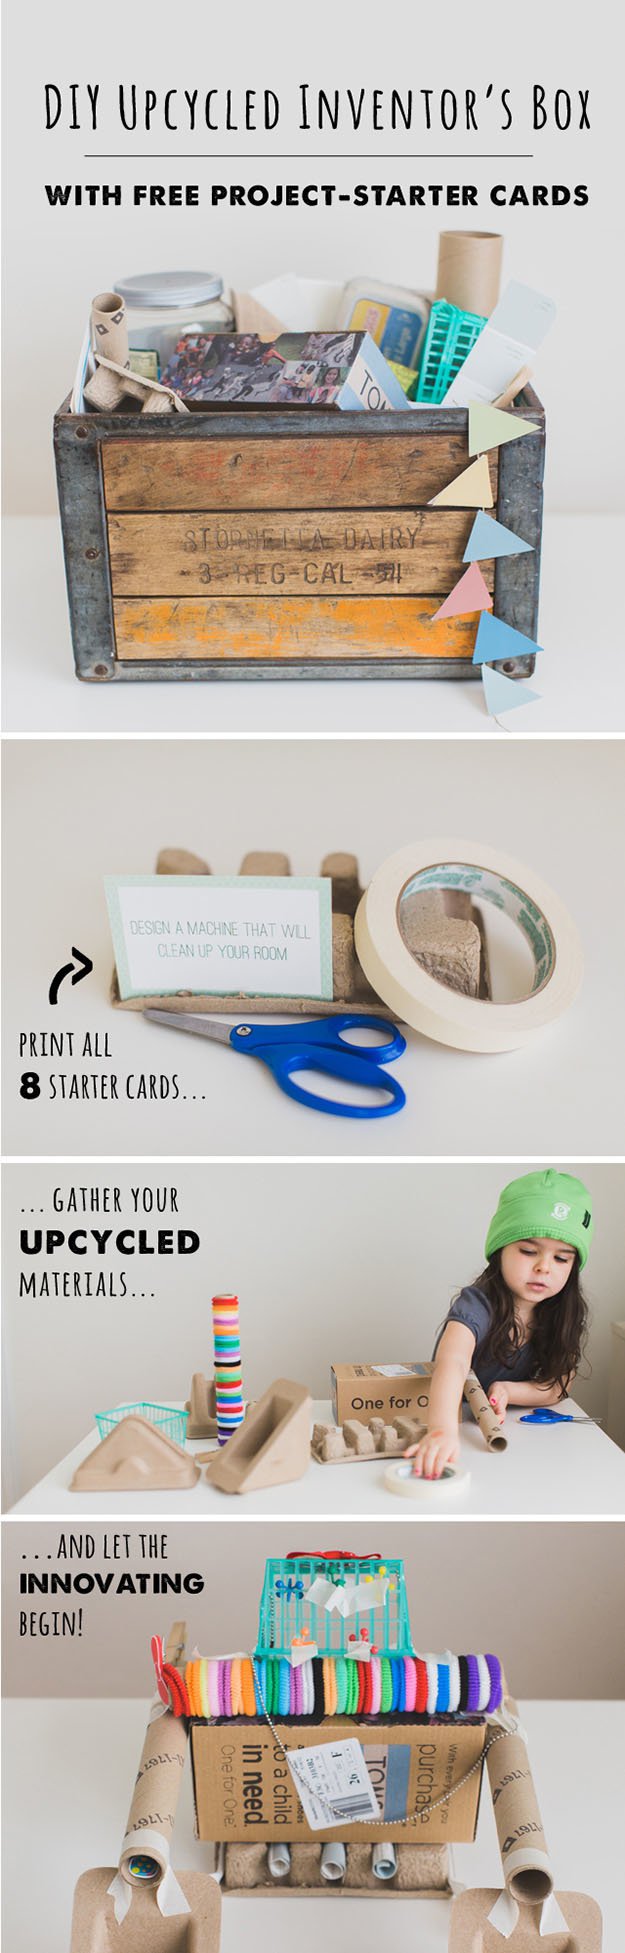 upcycling projects